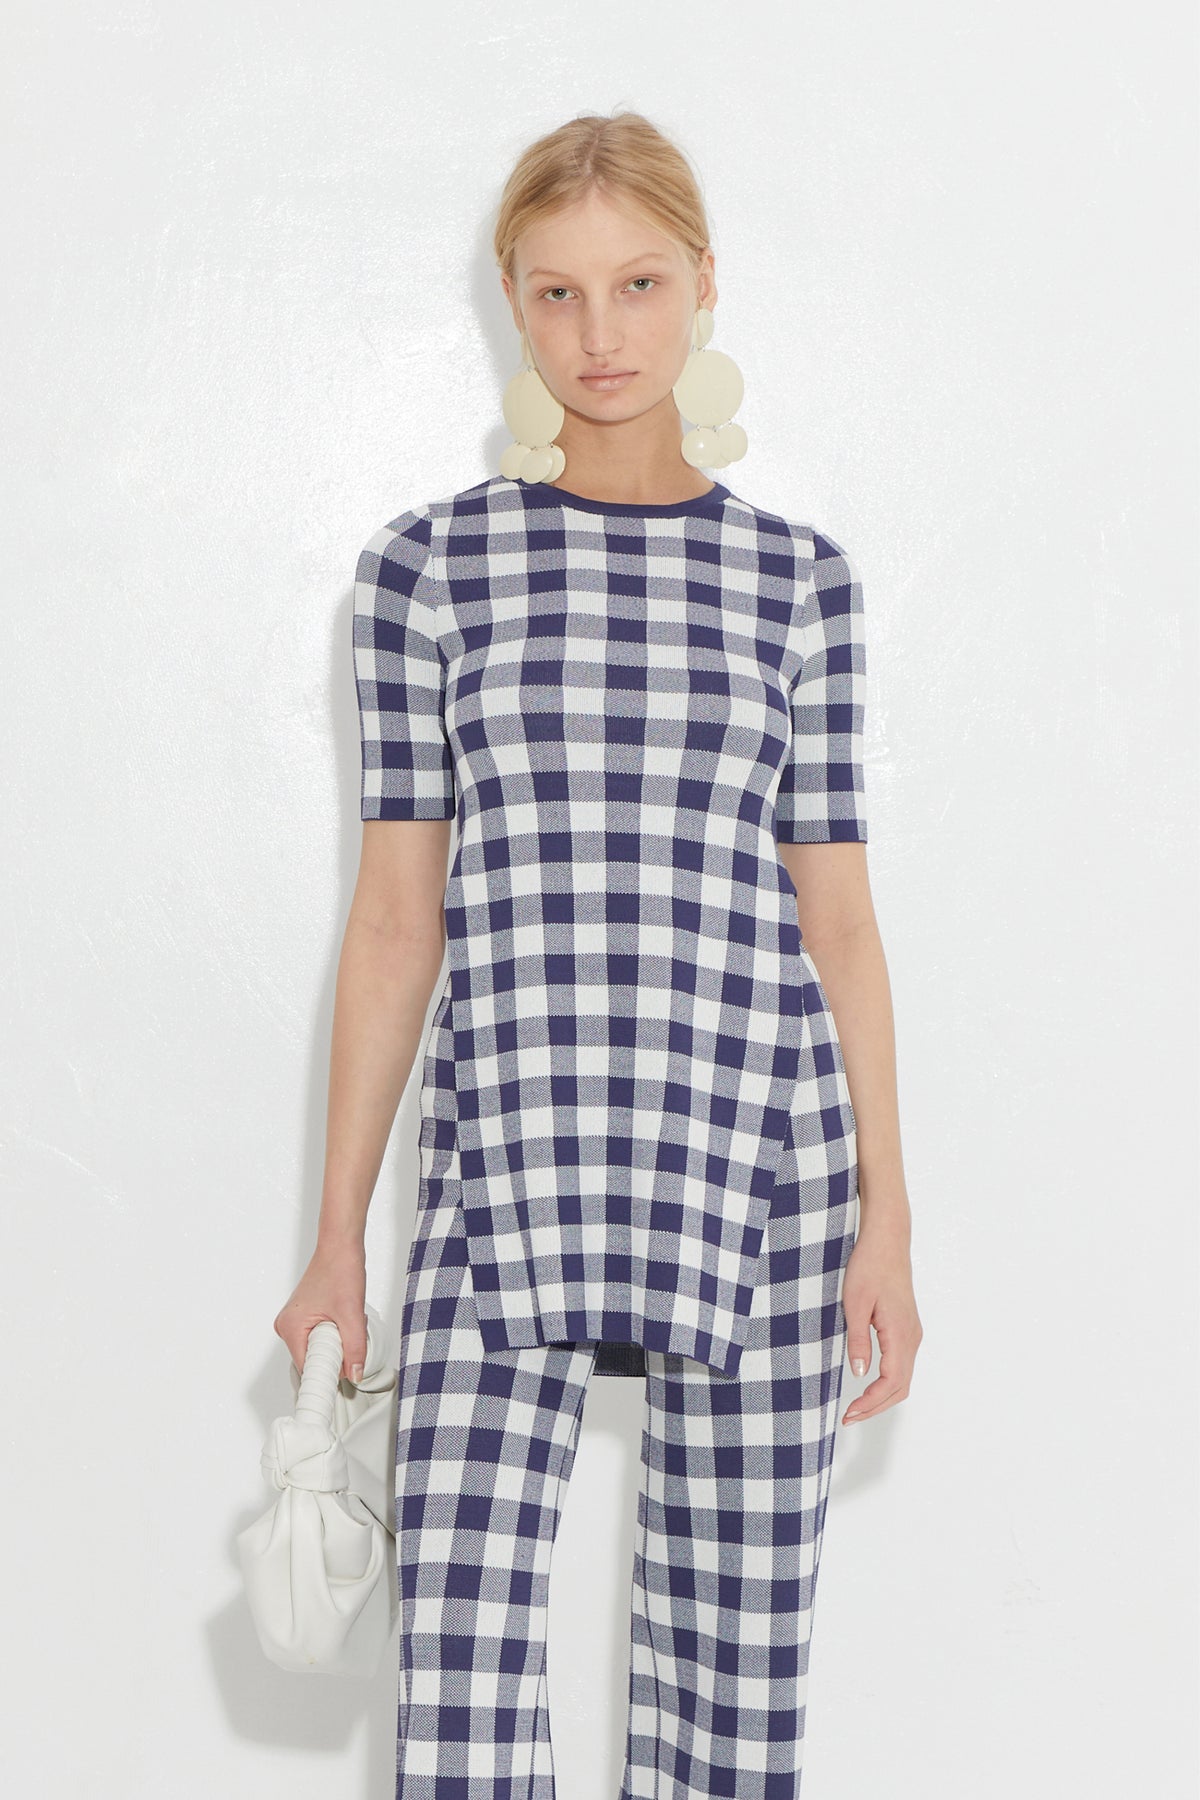 Knits By Canoga Short Sleeve Top in Ink Gingham